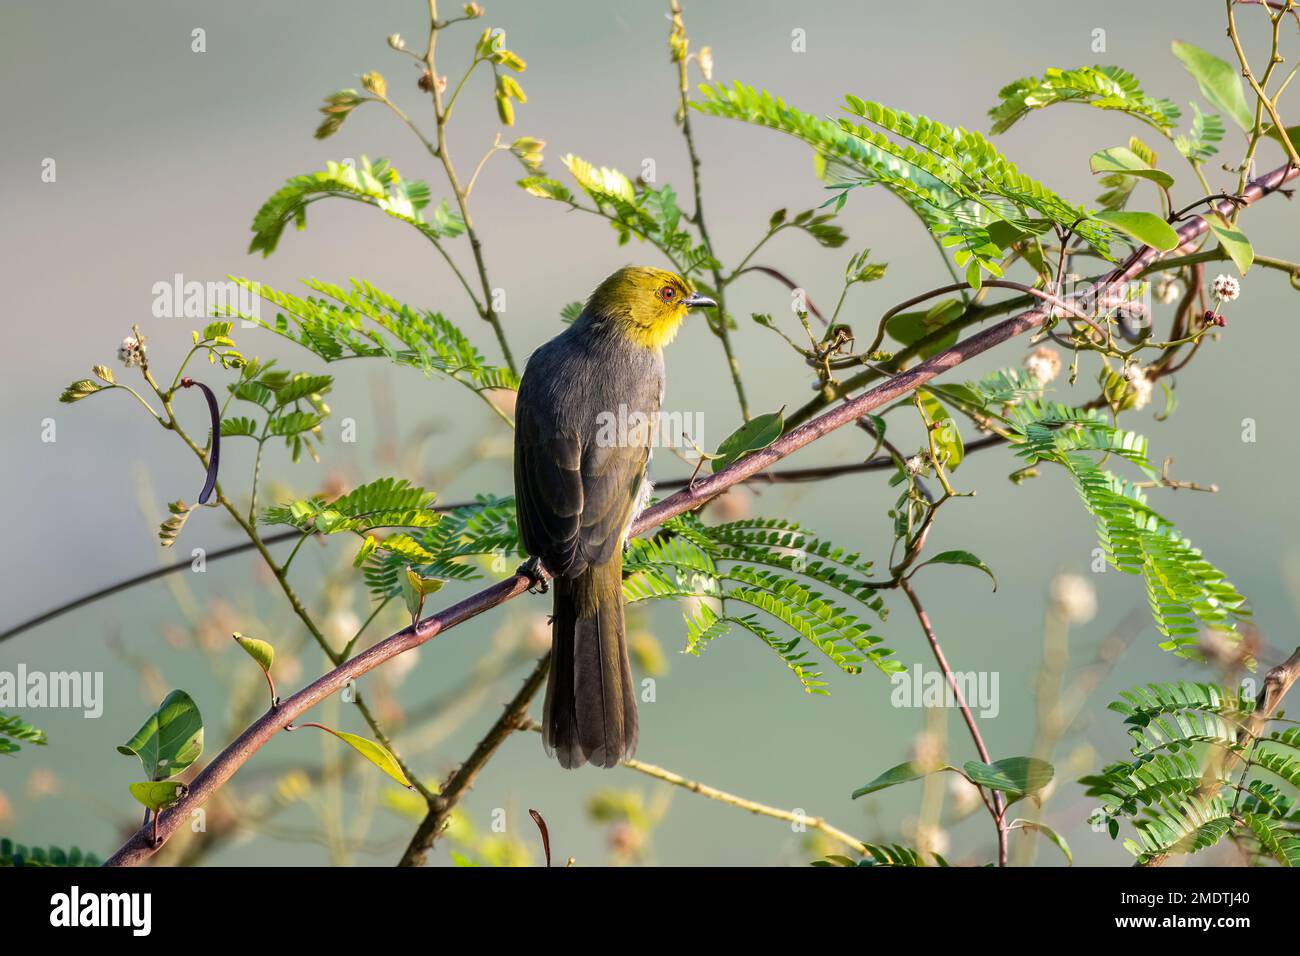 Yellow-throated bulbul or Pycnonotus xantholaemus an endemic specie of southern India, observed in Hampi, Karnataka Stock Photo